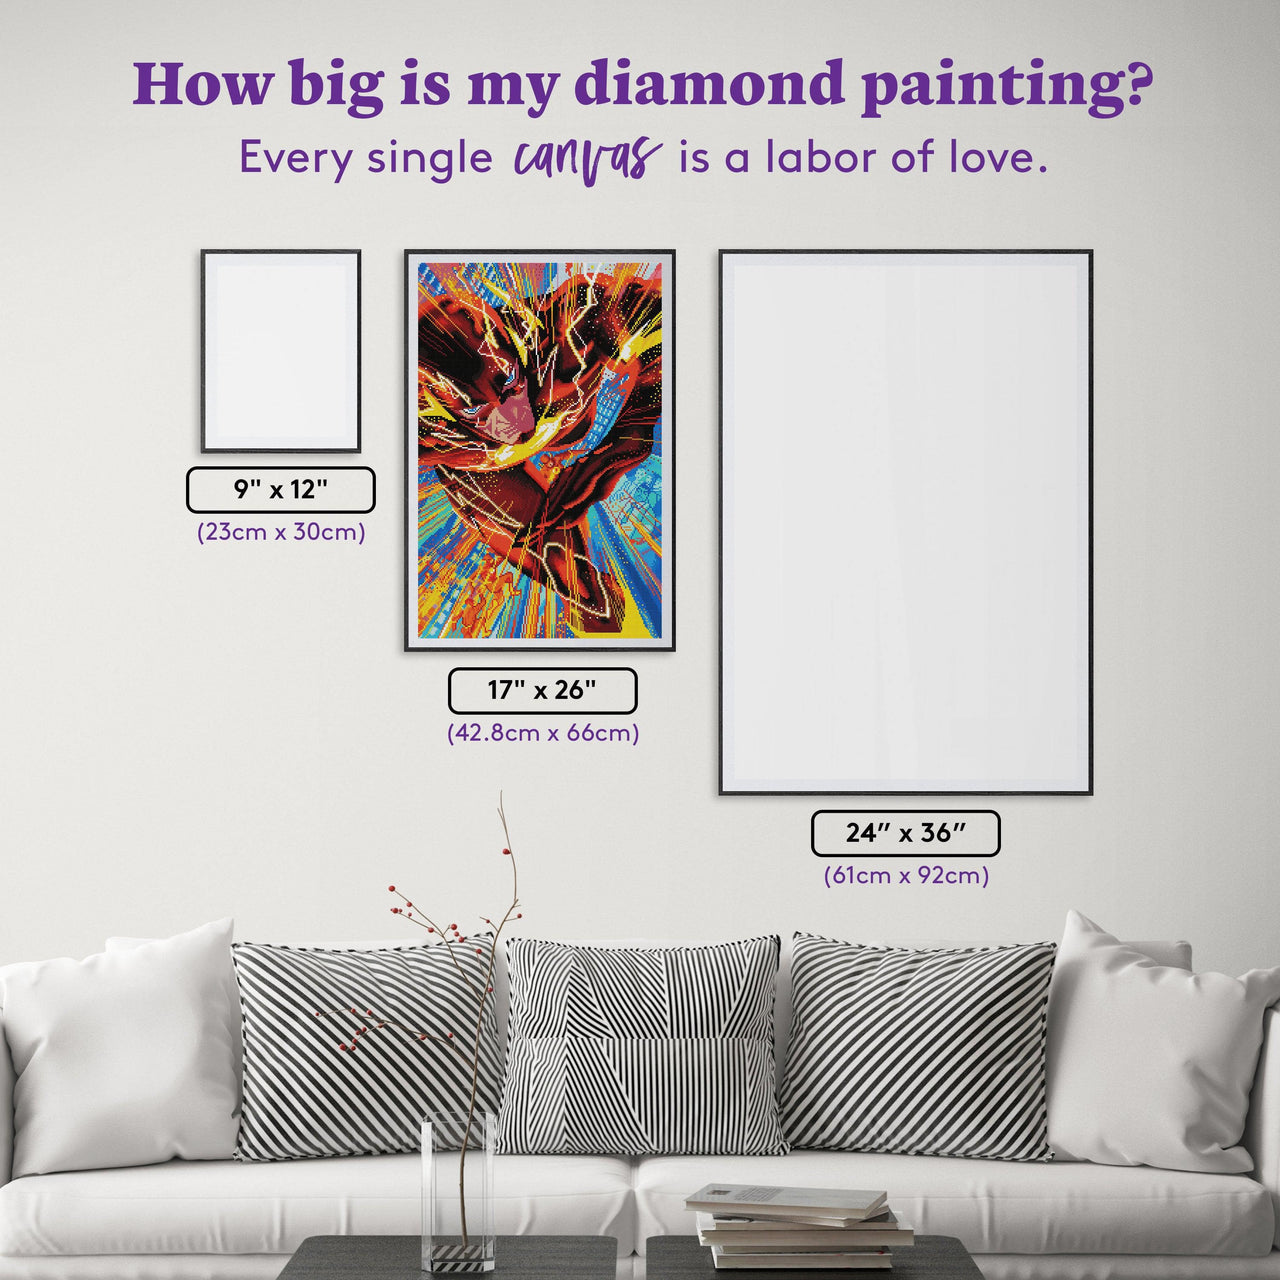 Diamond Painting The Flash™ 17" x 26" (42.8cm x 66cm) / Square With 35 Colors Including 4 ABs / 45,580